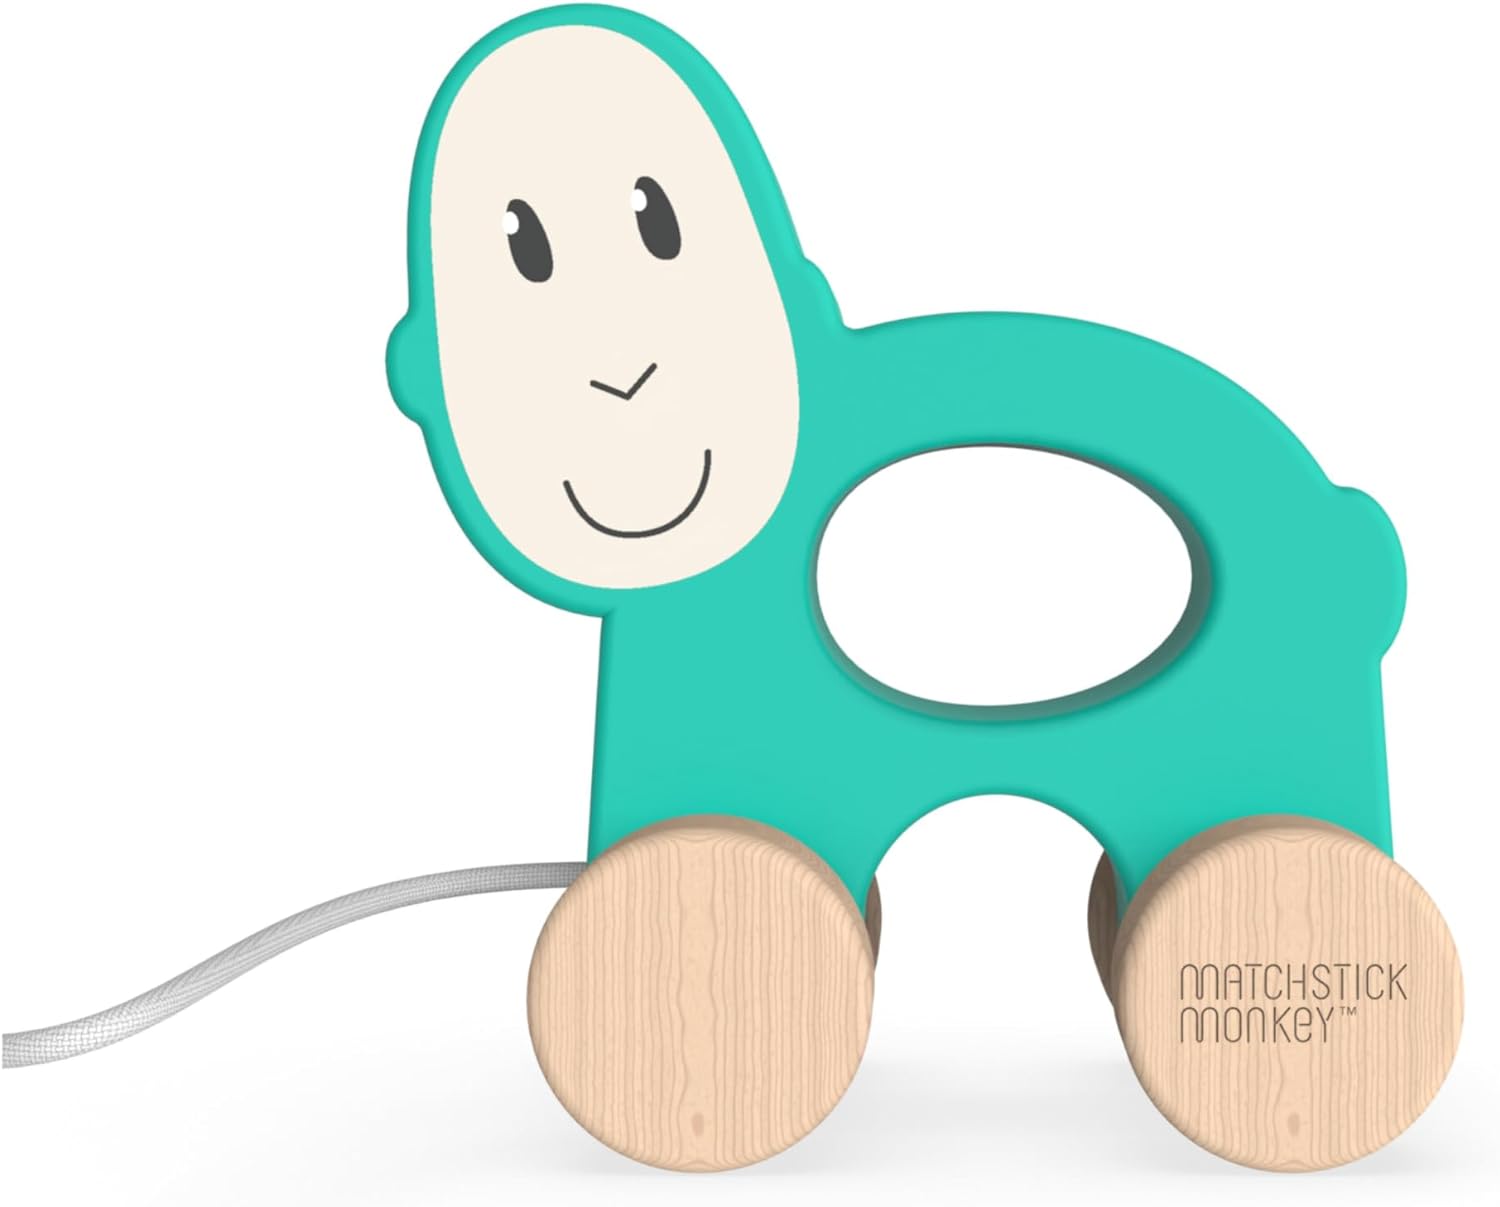 Teal wooden monkey pull-toy